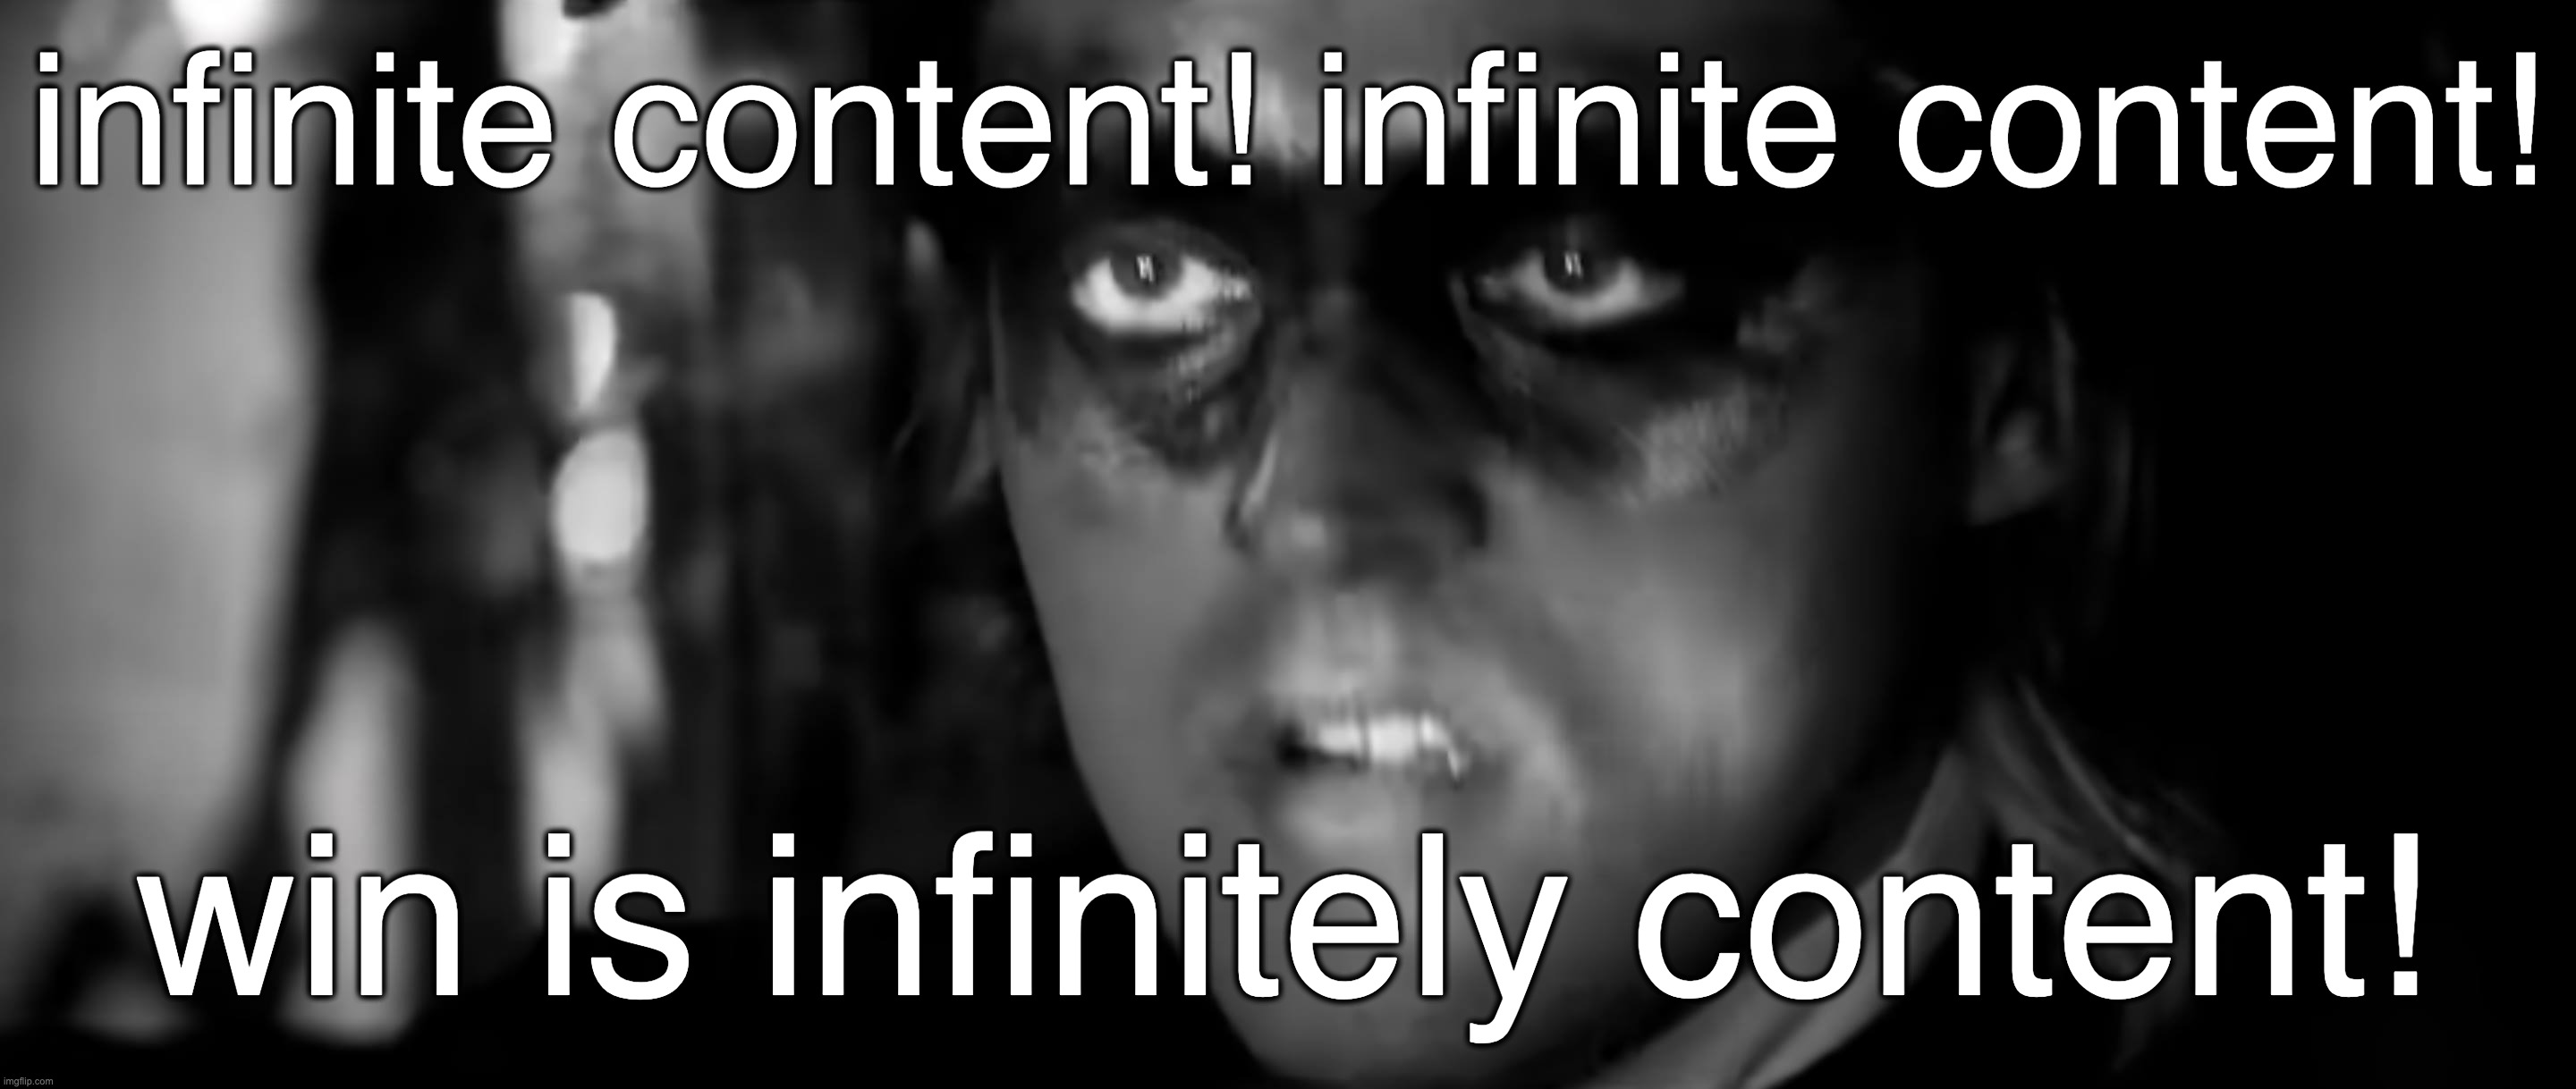 infinite content! infinite content! | infinite content! infinite content! win is infinitely content! | image tagged in the arcade fire,win butler,dj windows 98,infinite content,infiite content infinite content,win is infinitely content | made w/ Imgflip meme maker